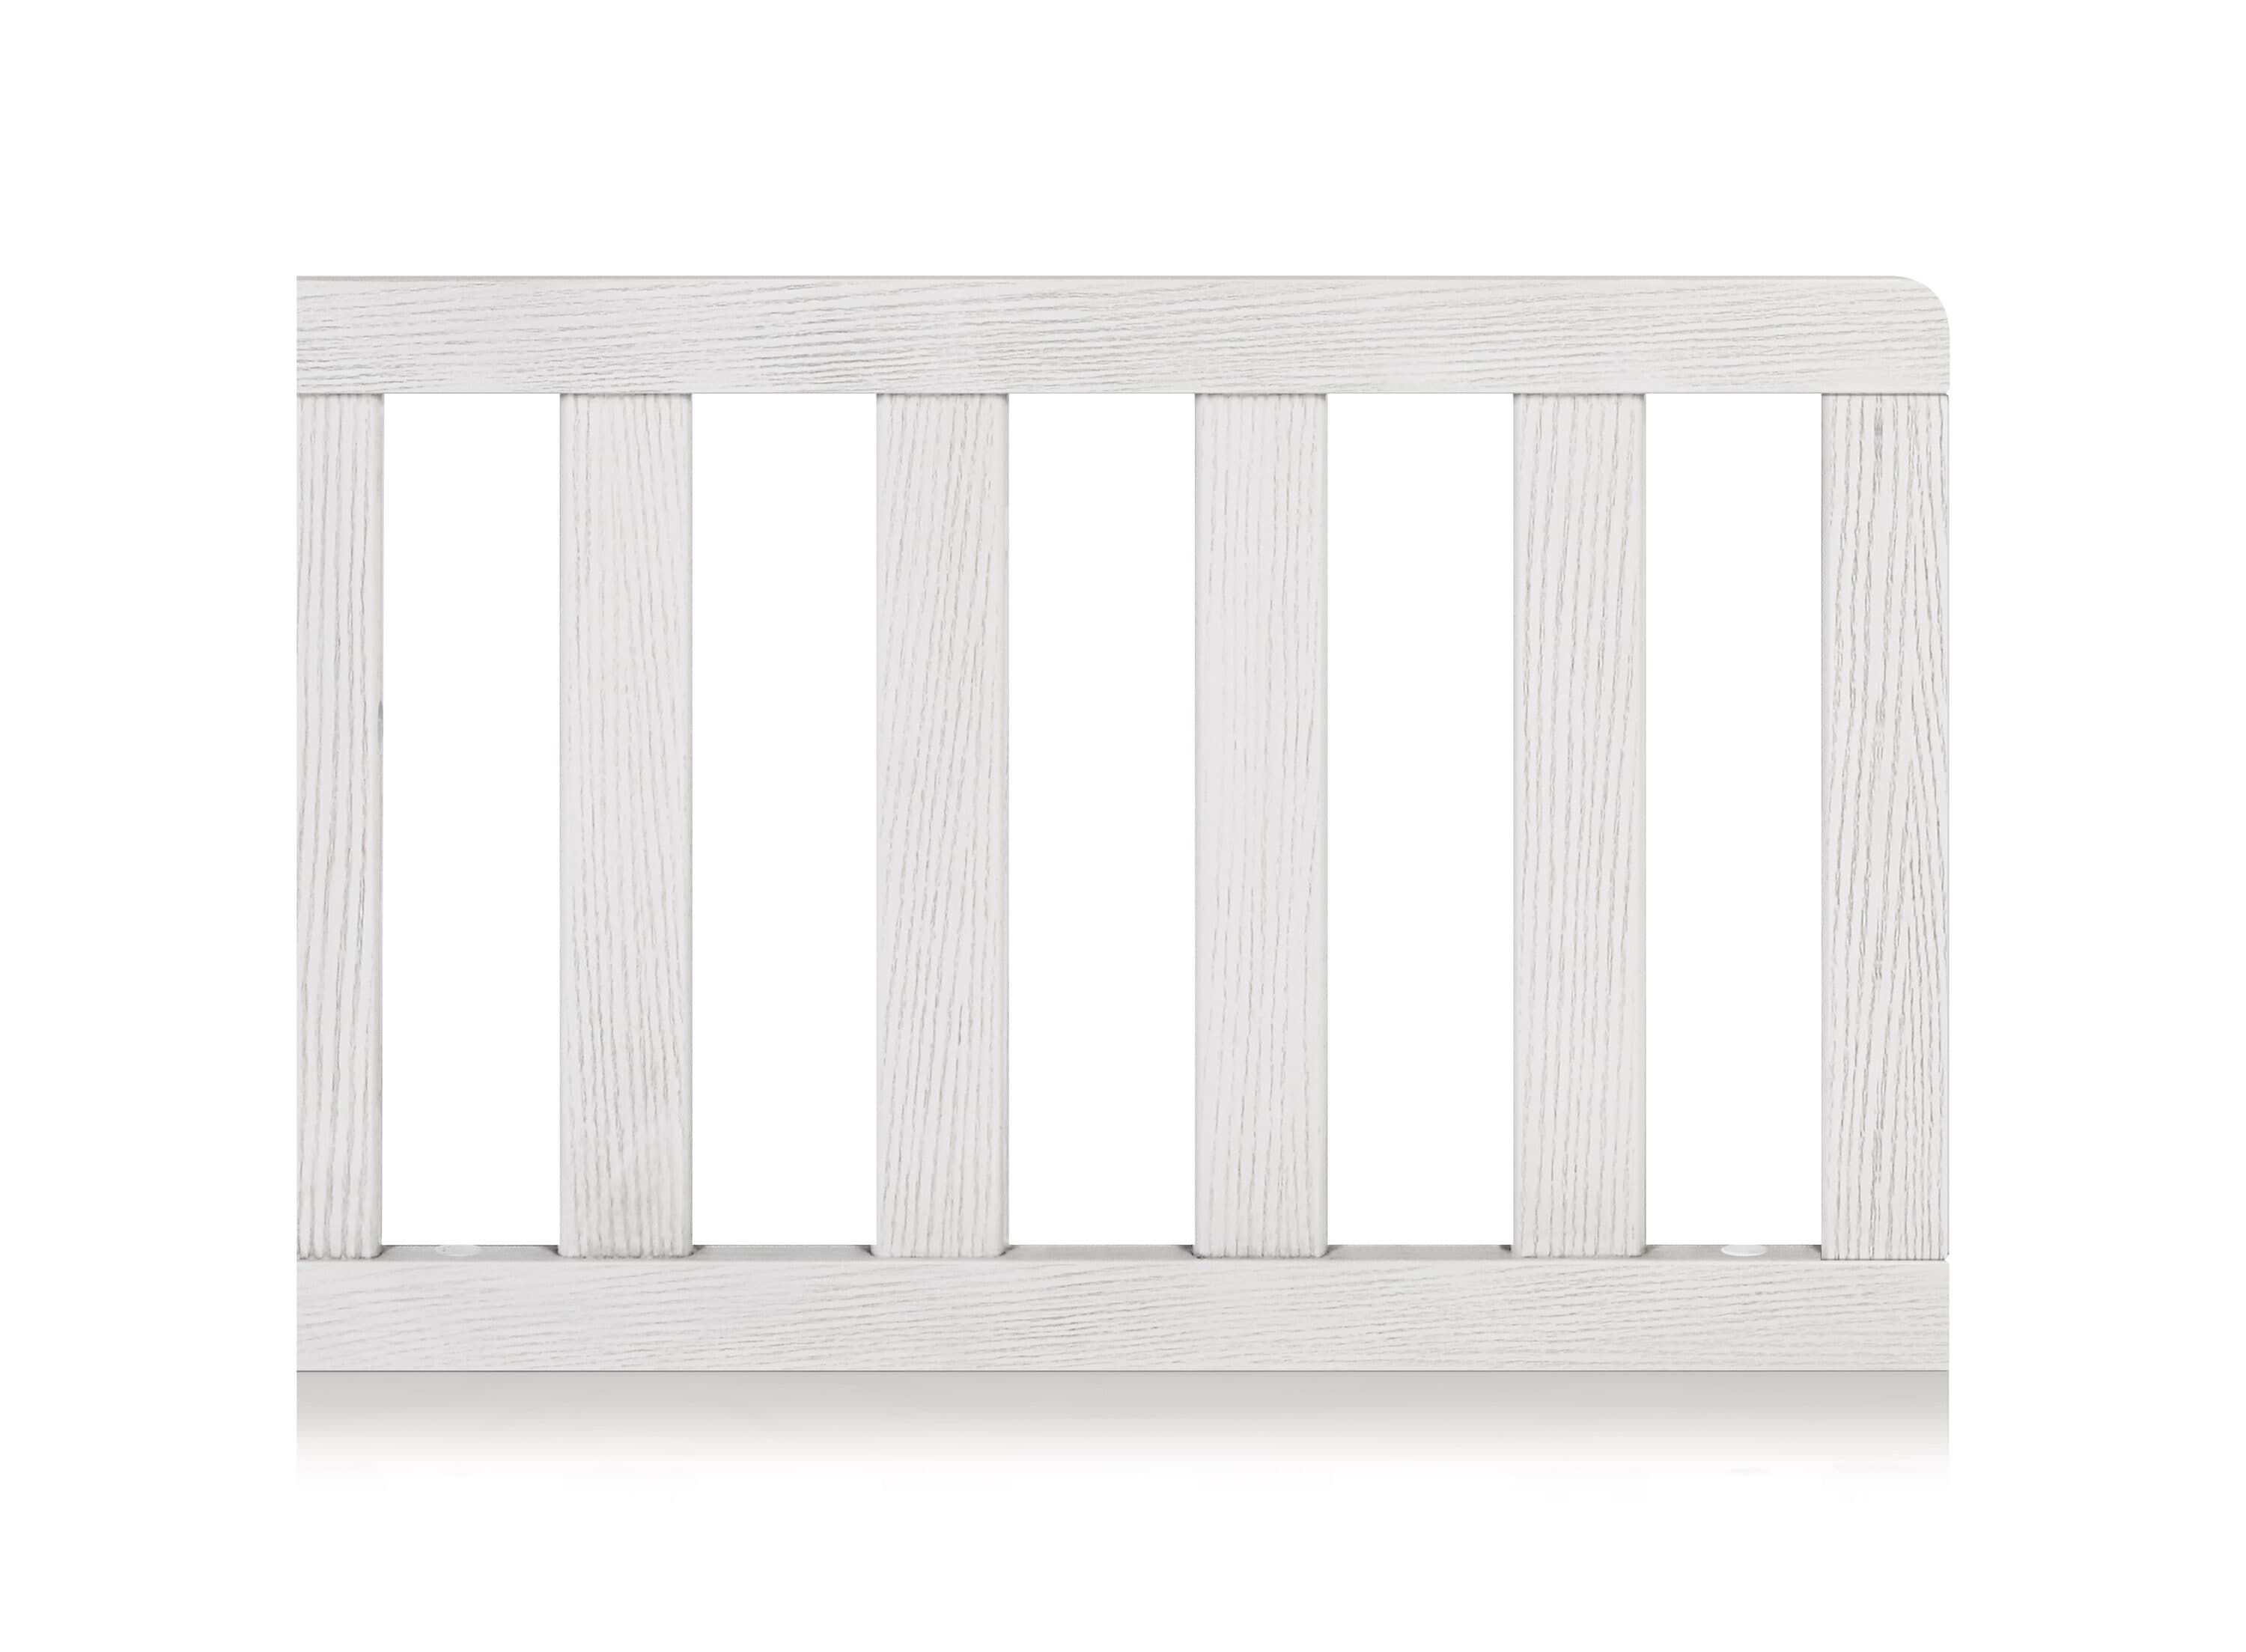 Suite Bebe Barnside Pine Painted Wood Standard Crib | CPSC & JPMA Certified | Transitional Style | Assembly Required | 2 Shelves for Storage -  27275-WGY